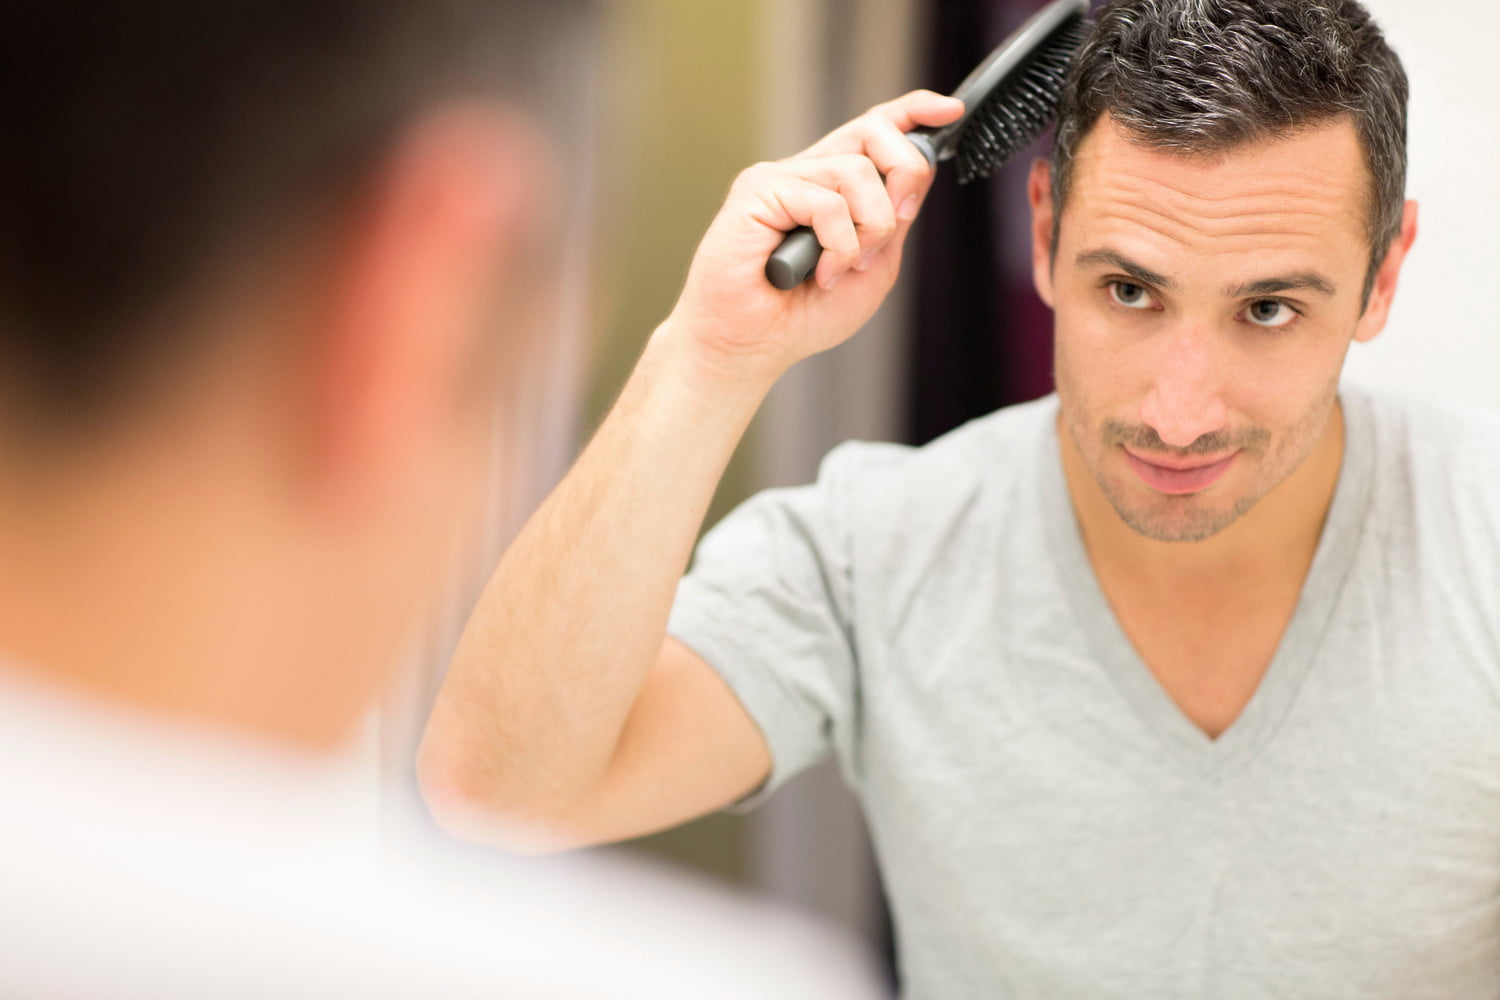 Hair Transplants in Chicago Can Regain Your Confidence